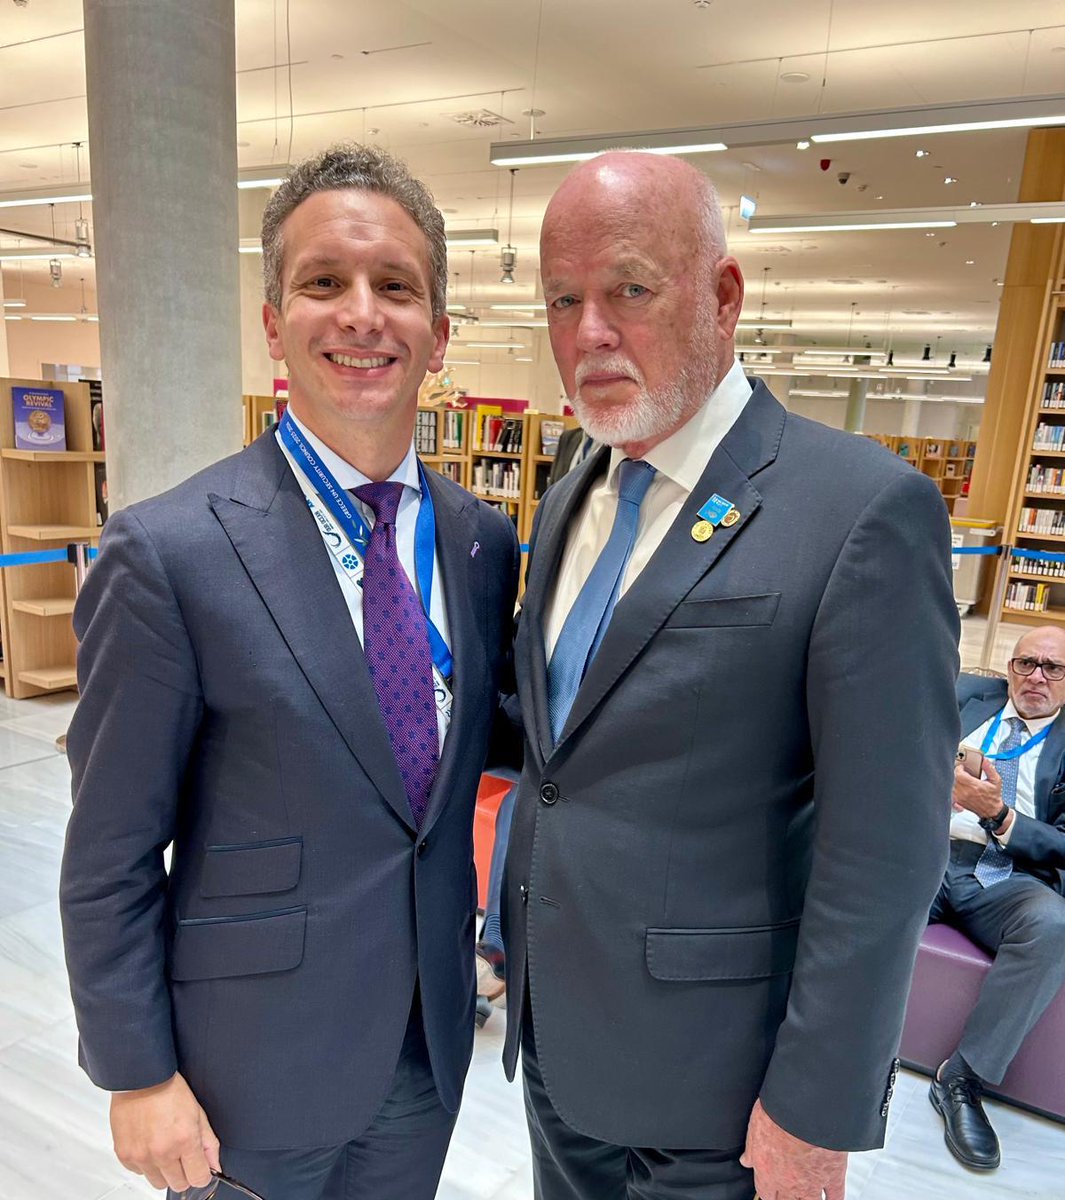 At @OurOceanGreece, @Amakrane, Managing Director @GCCMobility, had a constructive meeting with Amb. @ThomsonFiji, @UN Secretary-General's Special Envoy for the Ocean. The discussions focused on strengthening collaborative efforts & enhancing strategies to address sea-level rise.